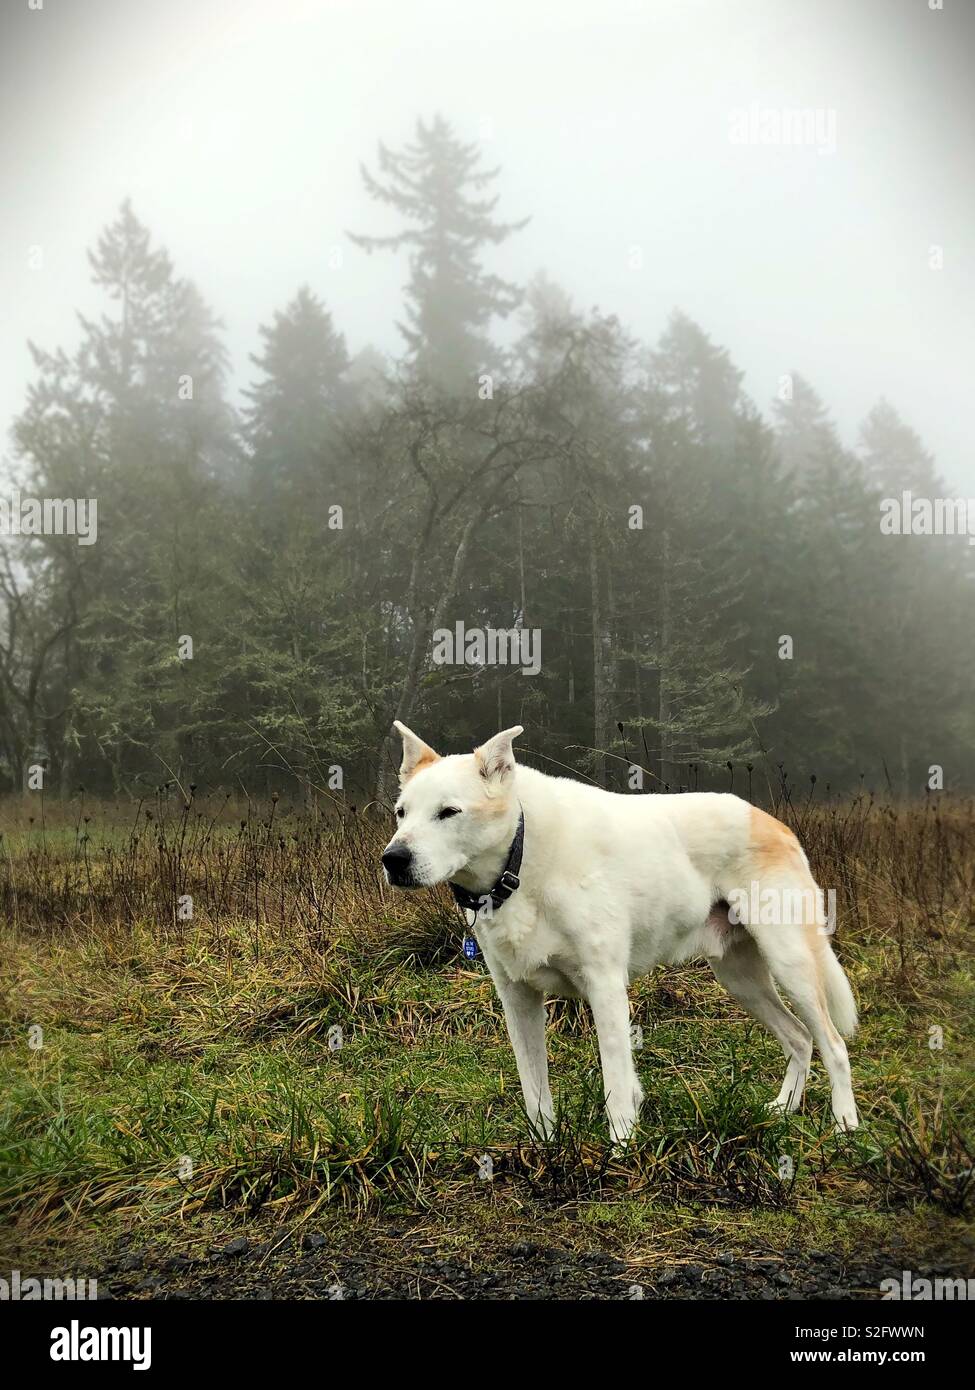 A white dog in a foggy field. Stock Photo